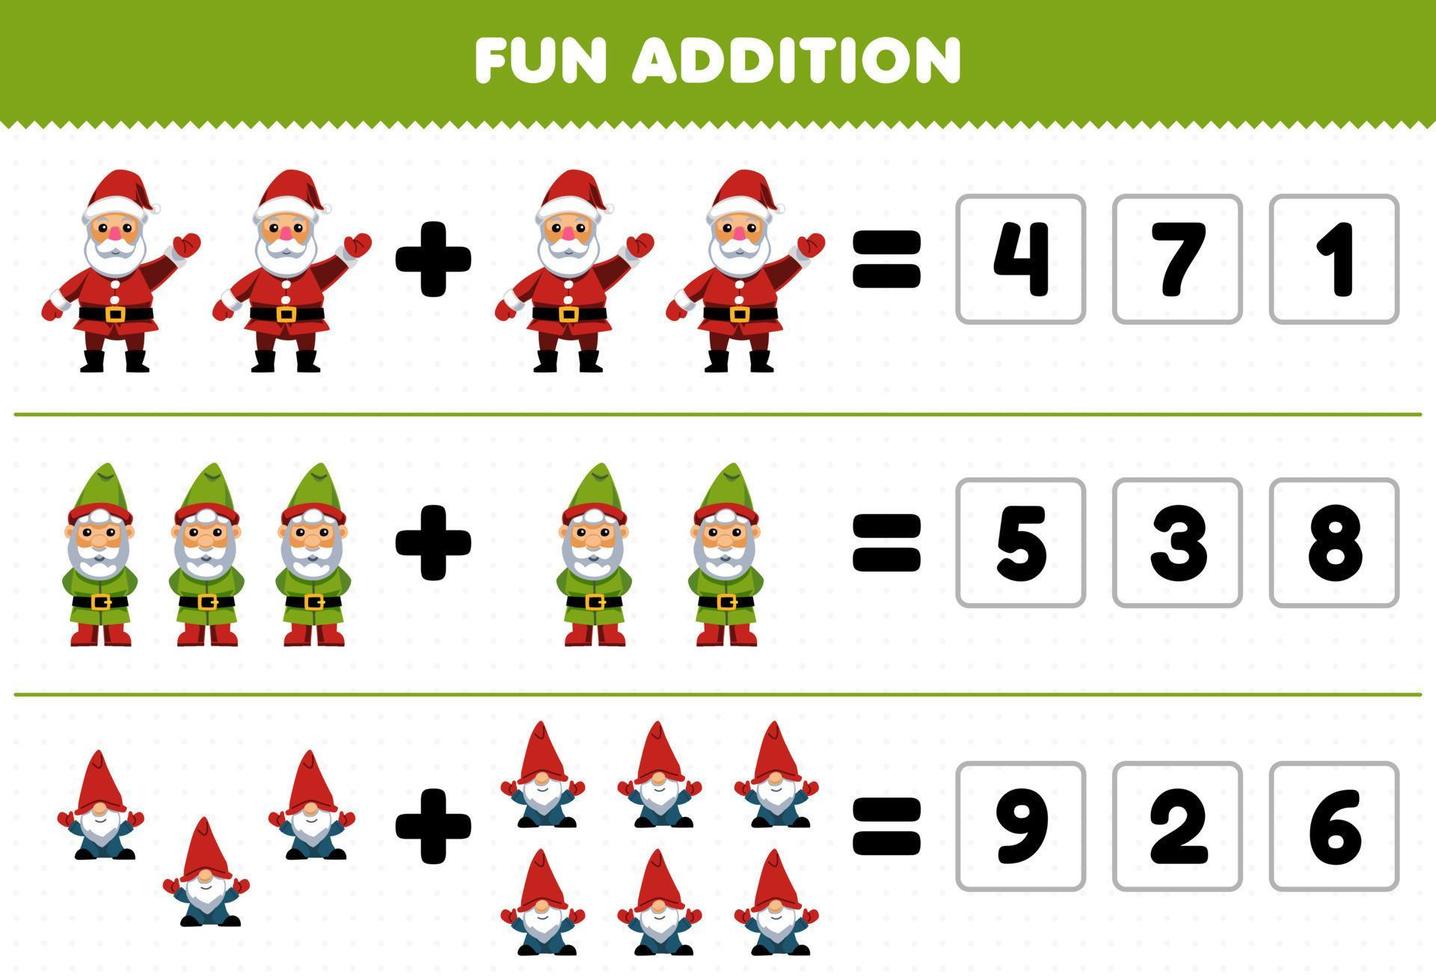 Education game for children fun addition by guess the correct number of cute cartoon santa and gnome printable winter worksheet vector